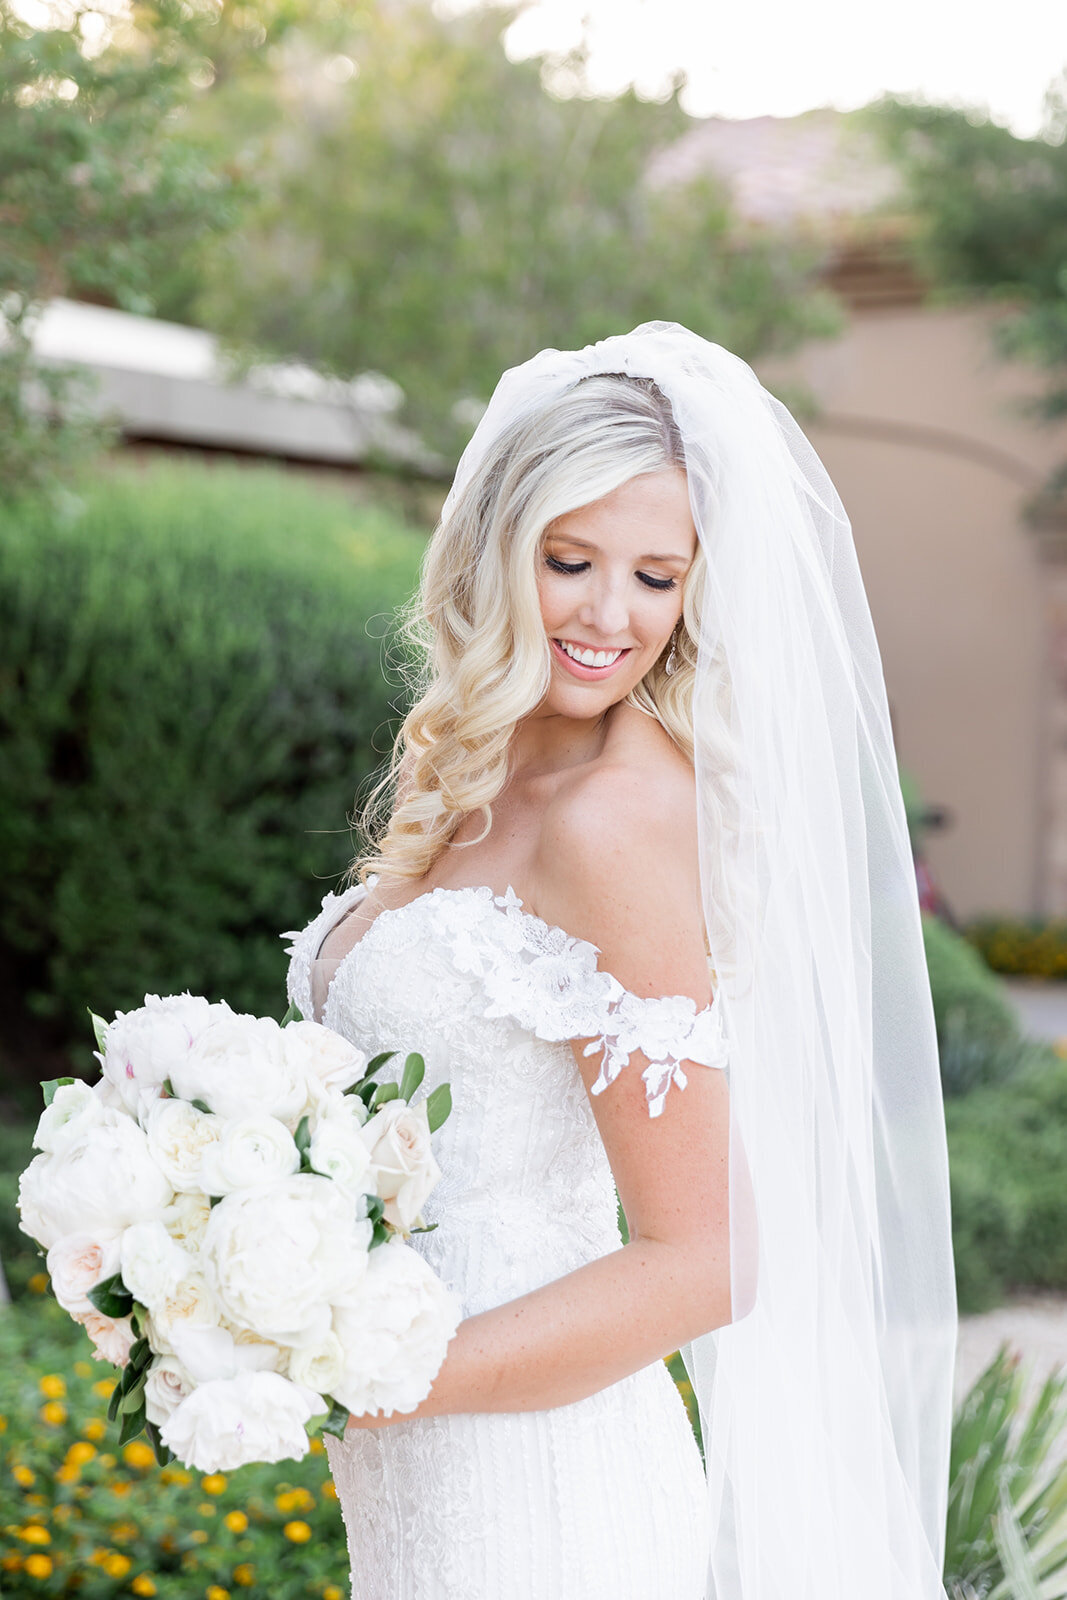 Karlie Colleen Photography - Holly & Ronnie Wedding - Seville Country Club - Gilbert Arizona-671